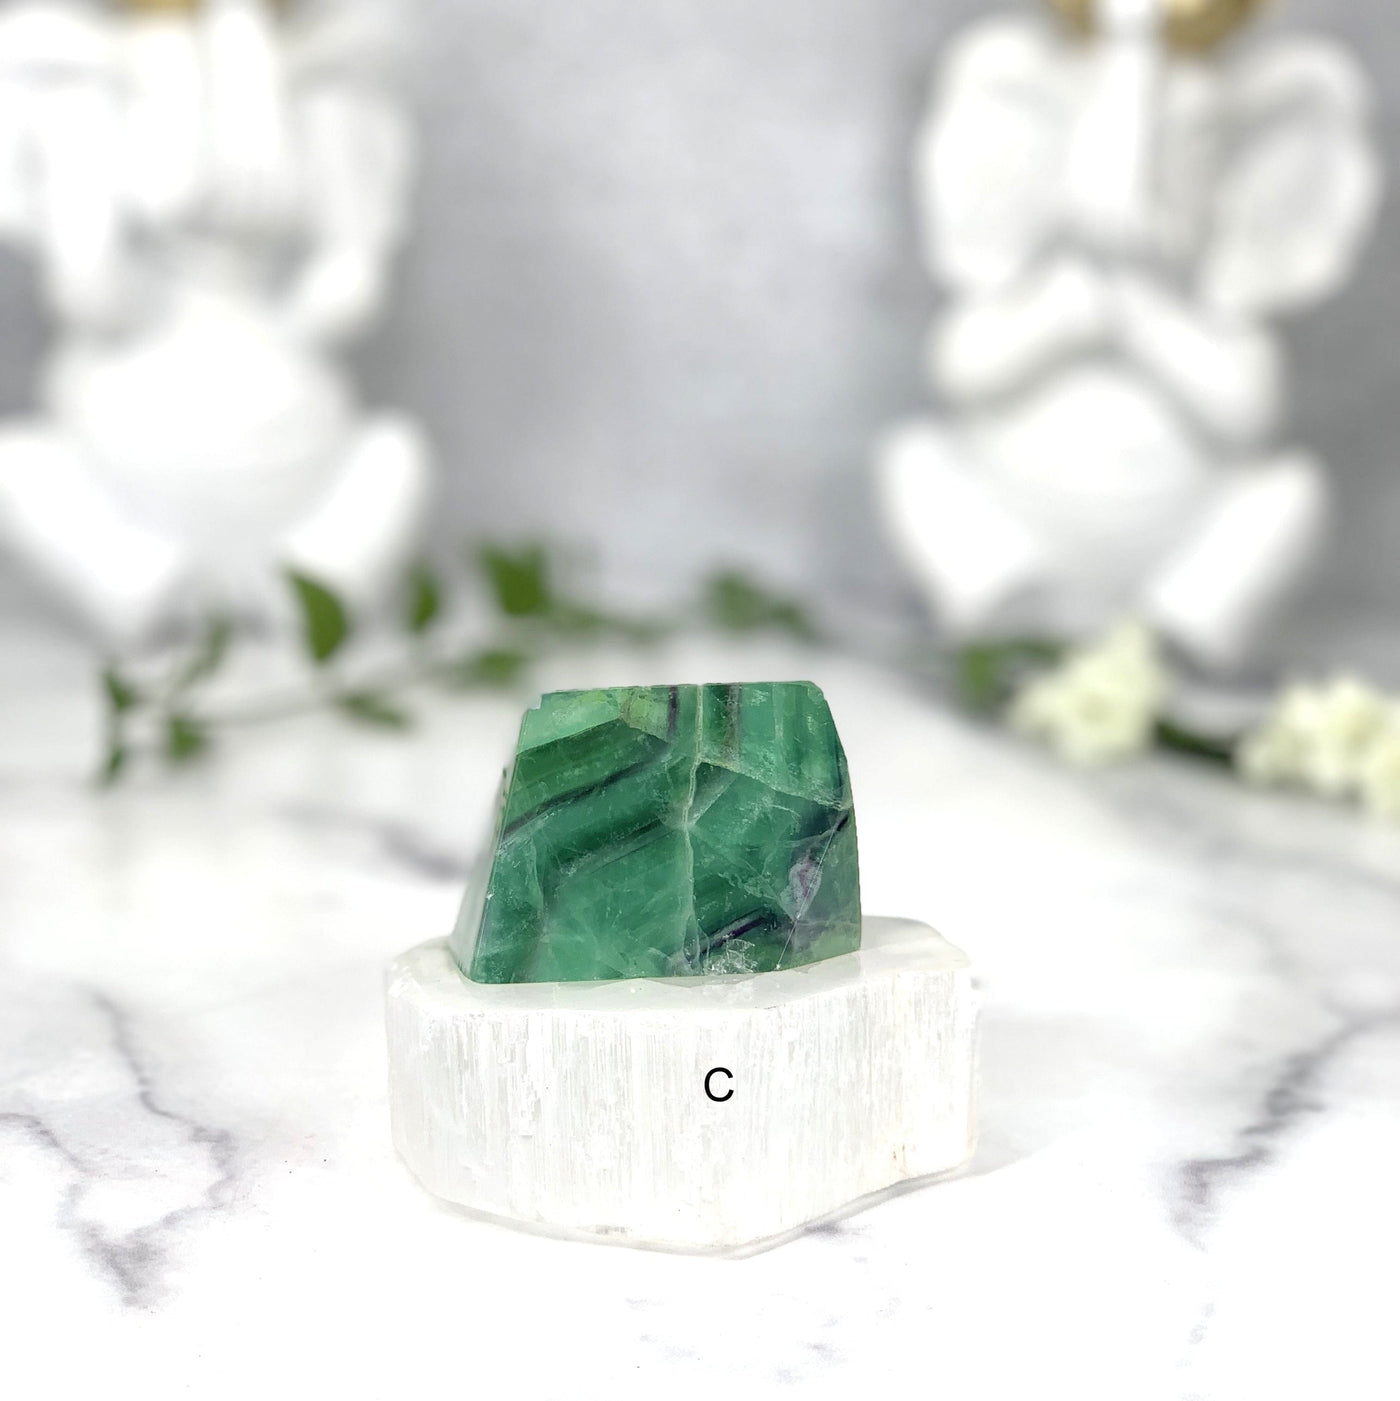 Front side of the Fluorite Chunk (C) on white background